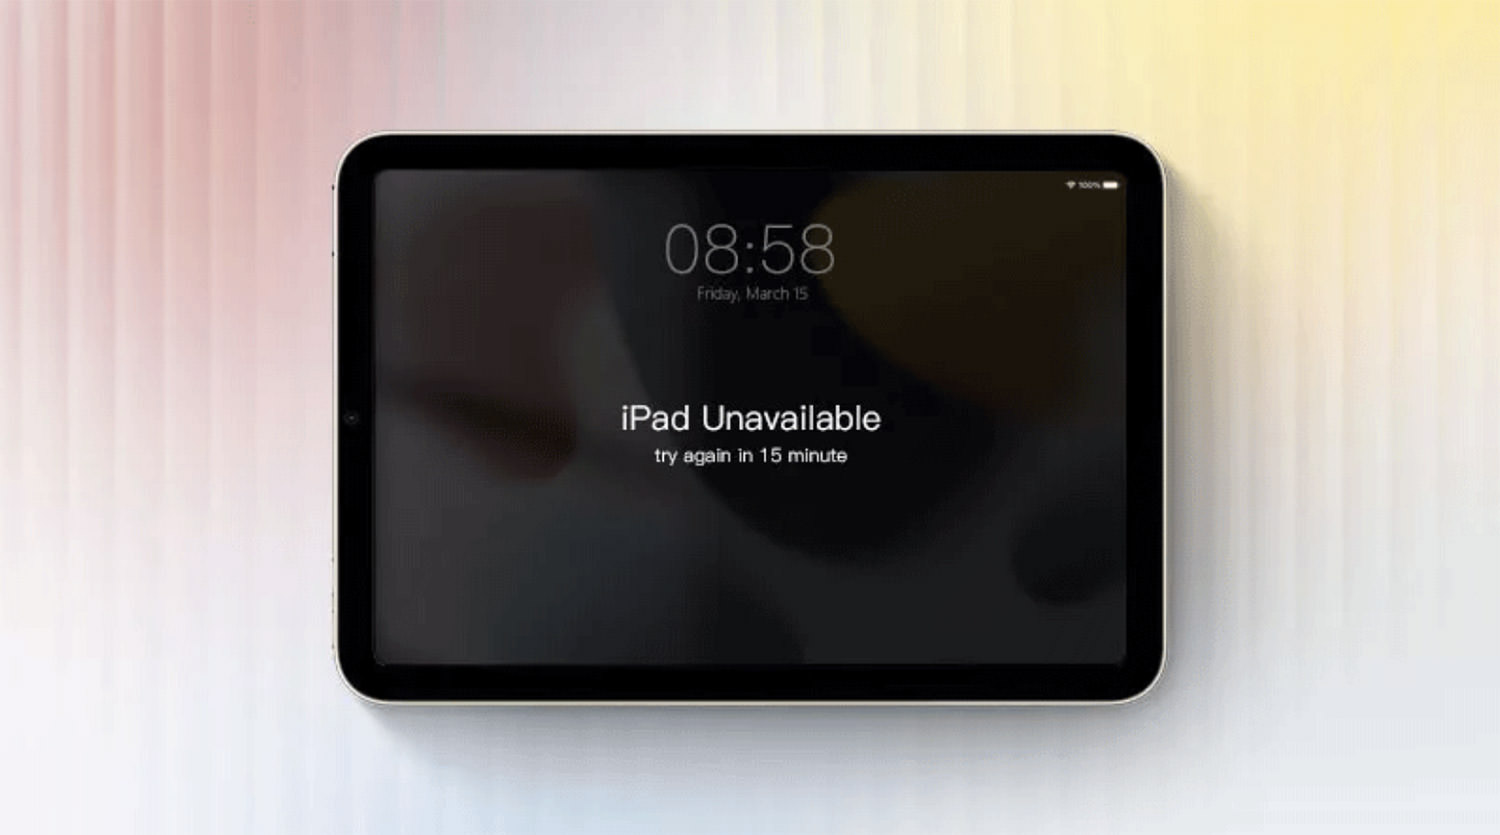 Illustrative image of an iPad showing an 'iPad Unavailable' message.